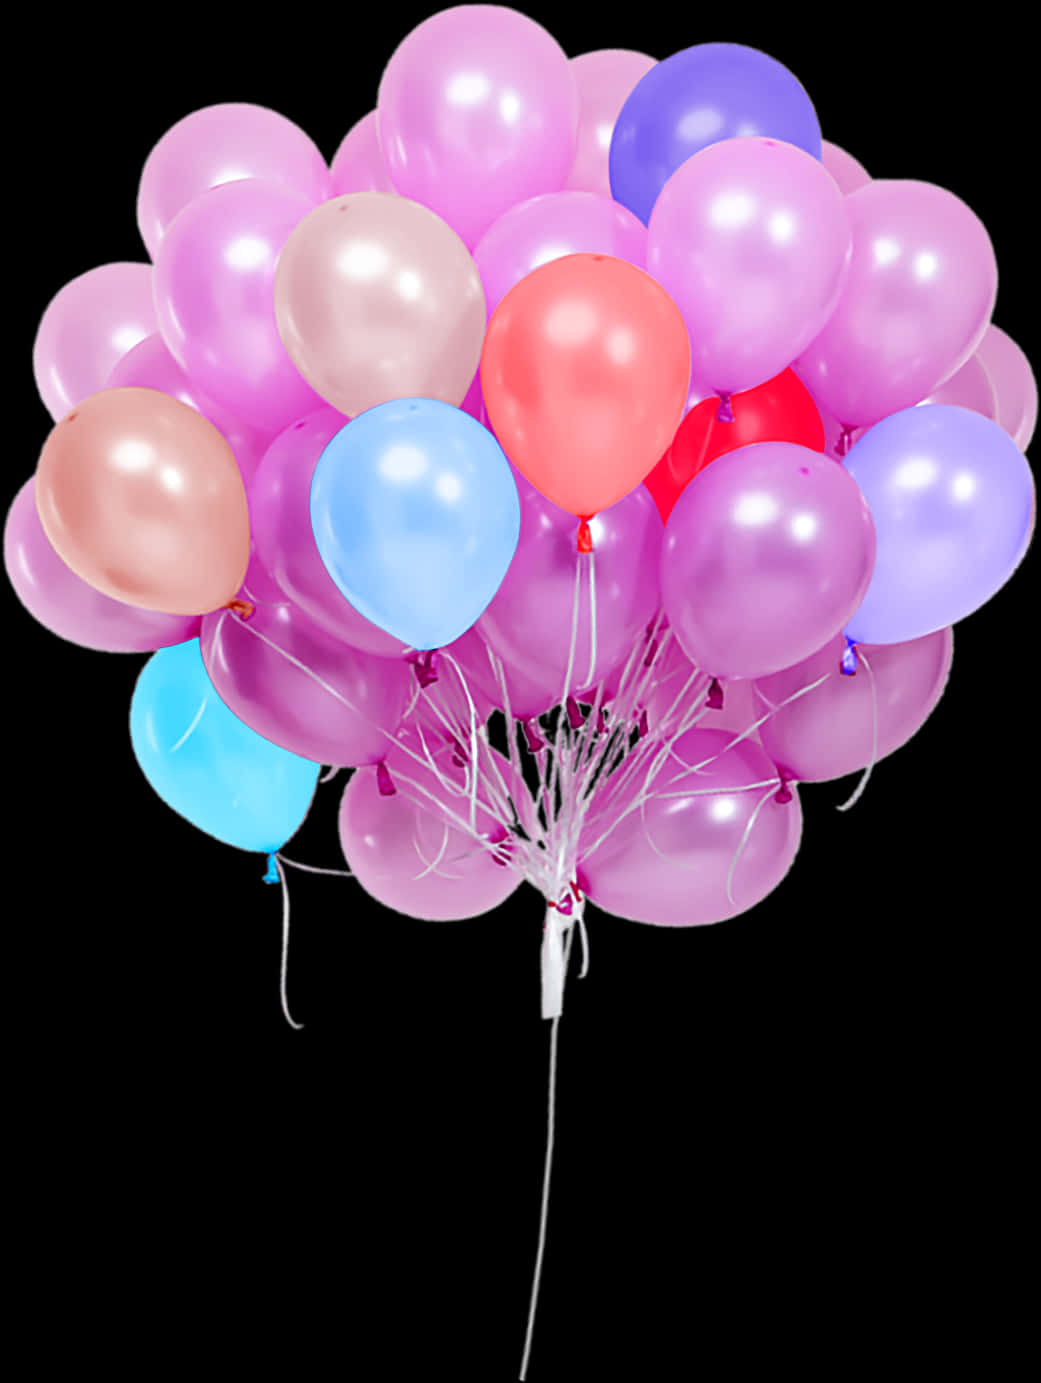 Colorful Balloons Bunch Transparent Background PNG